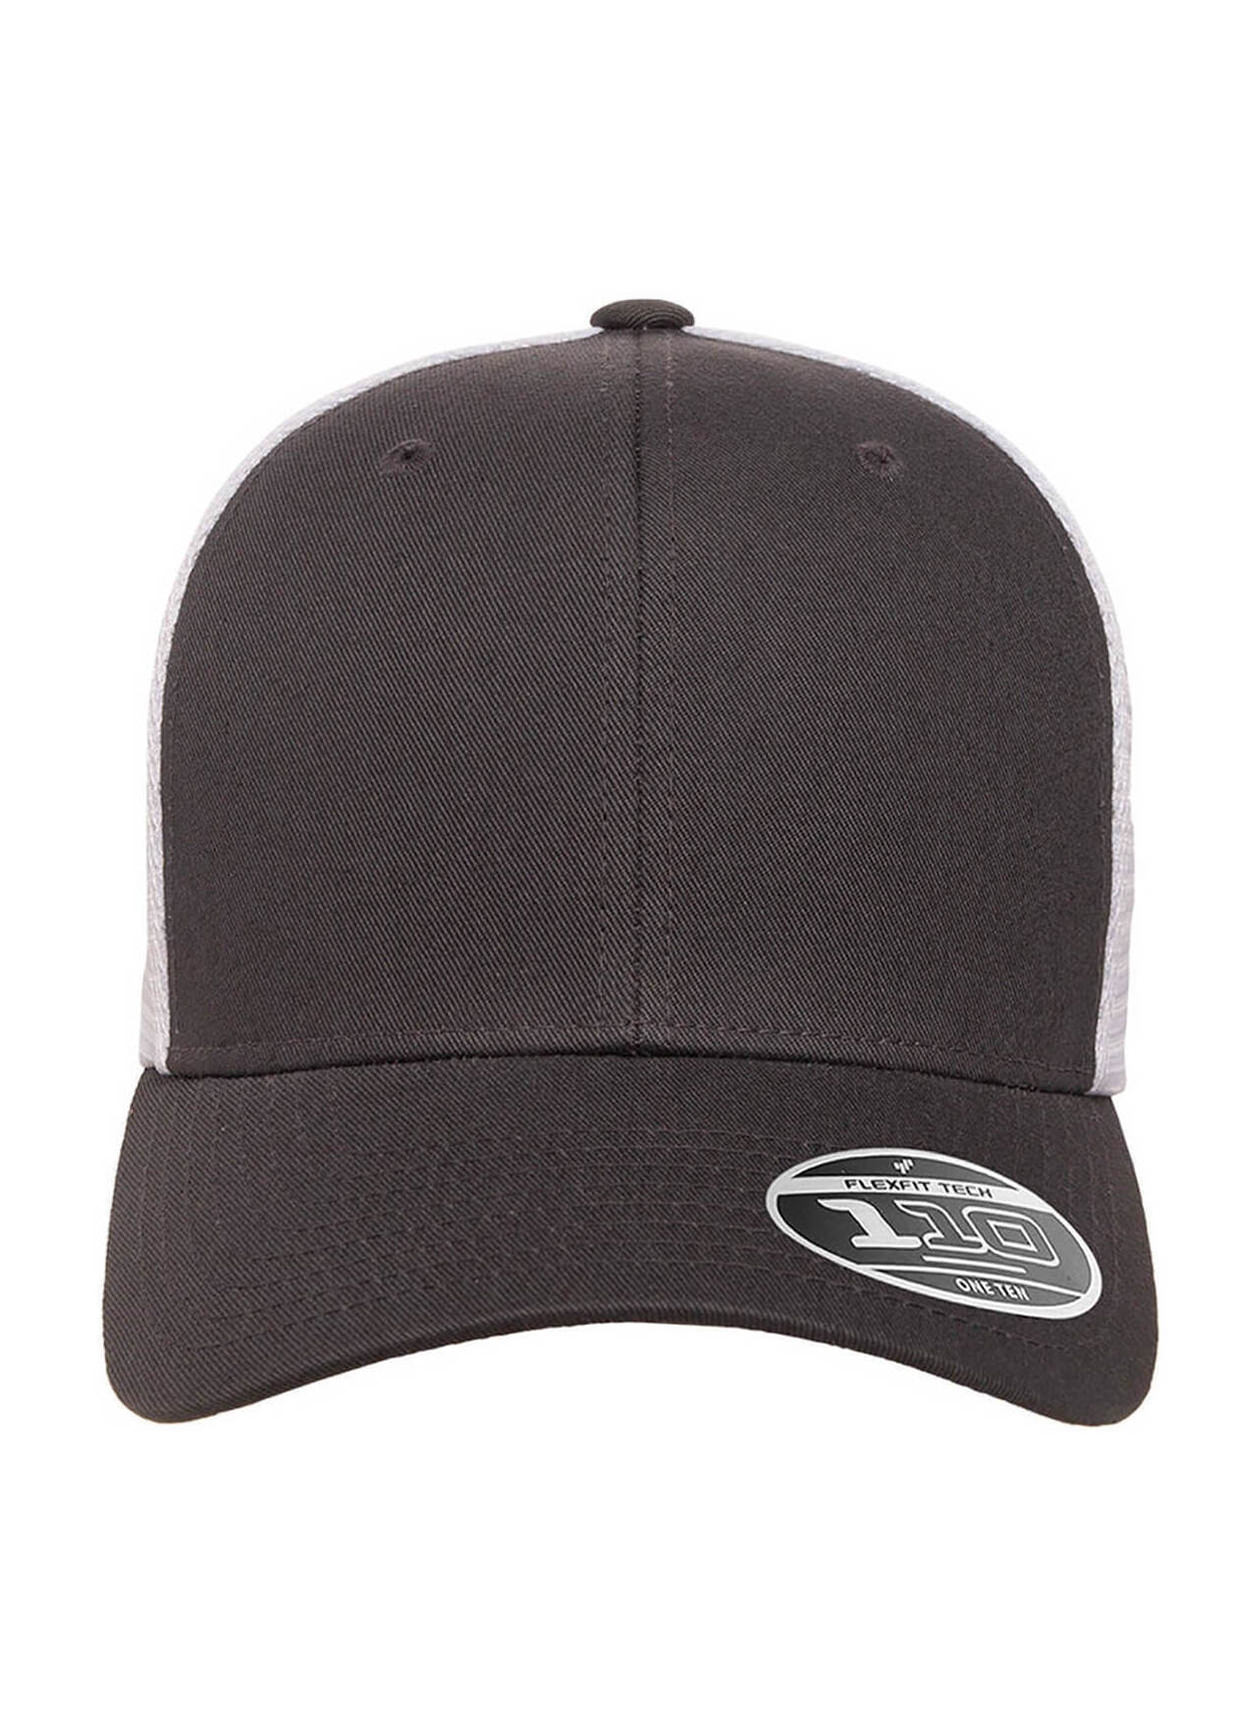 Charcoal / White Yupoong Flexfit Adjustable | Yupoong 110 Mesh Hat